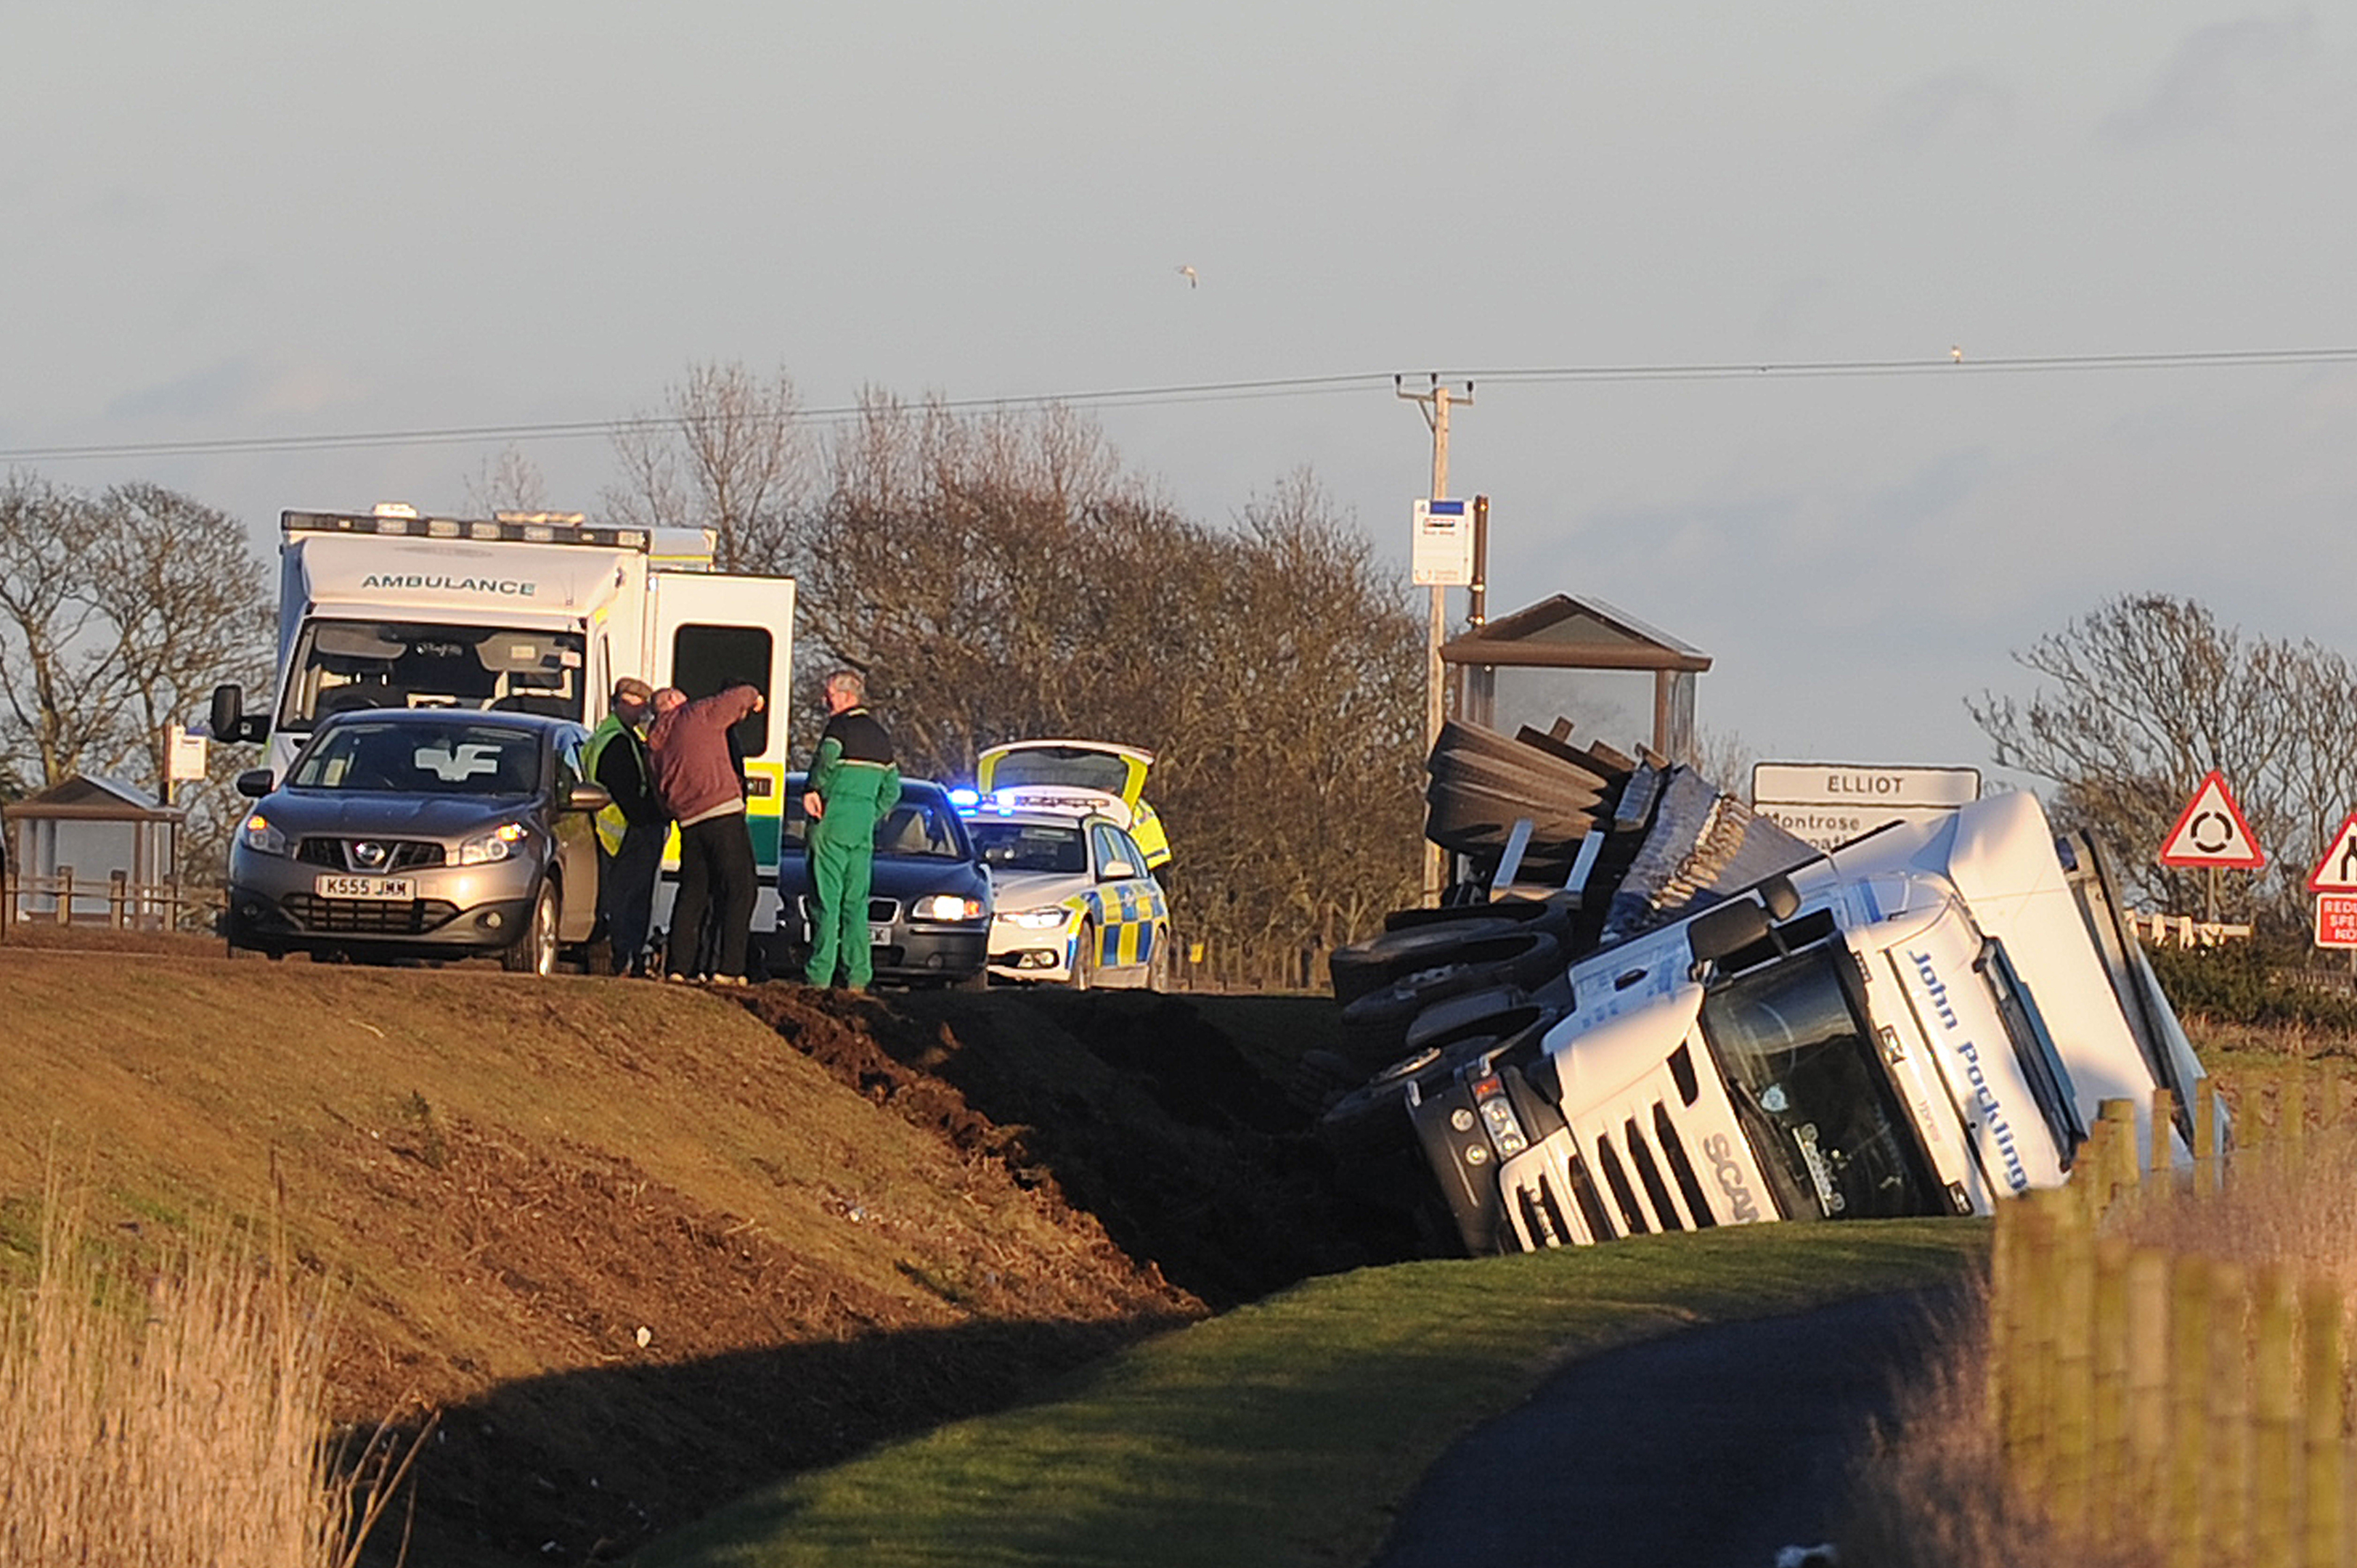 A lorry ended up in the ditch alongside the A92 south of Arbroath near the Arbirlot junction.